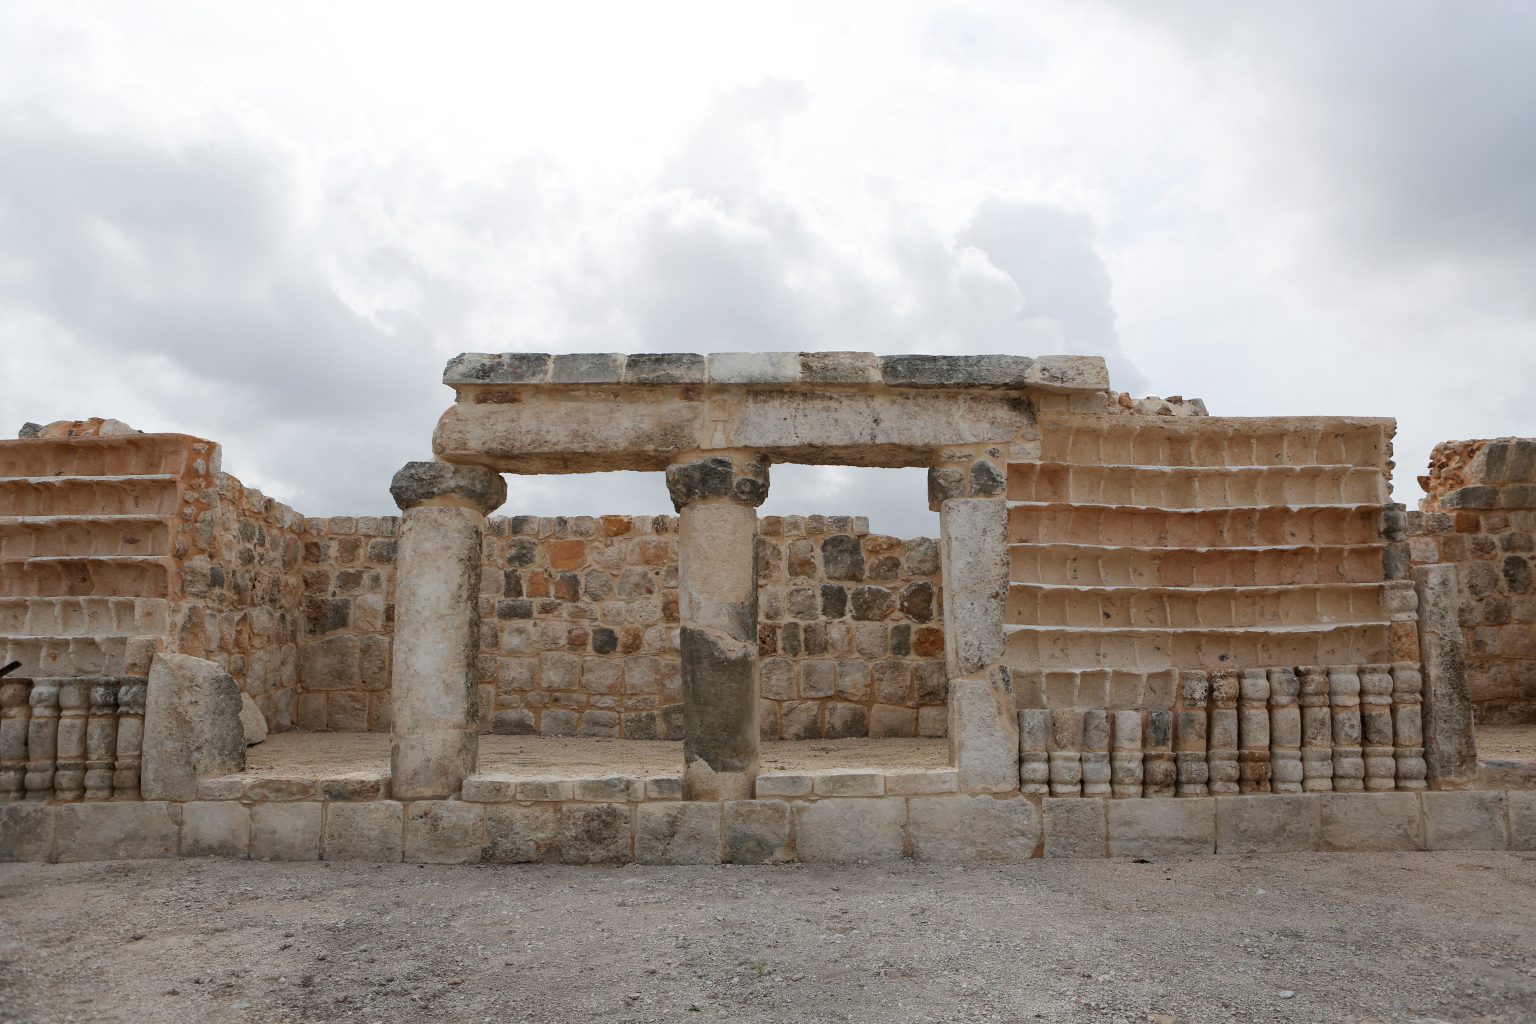 Archaeologists discovered a brand new Maya city called Xiol. Credit: Reuters/Lorenzo Hernandez